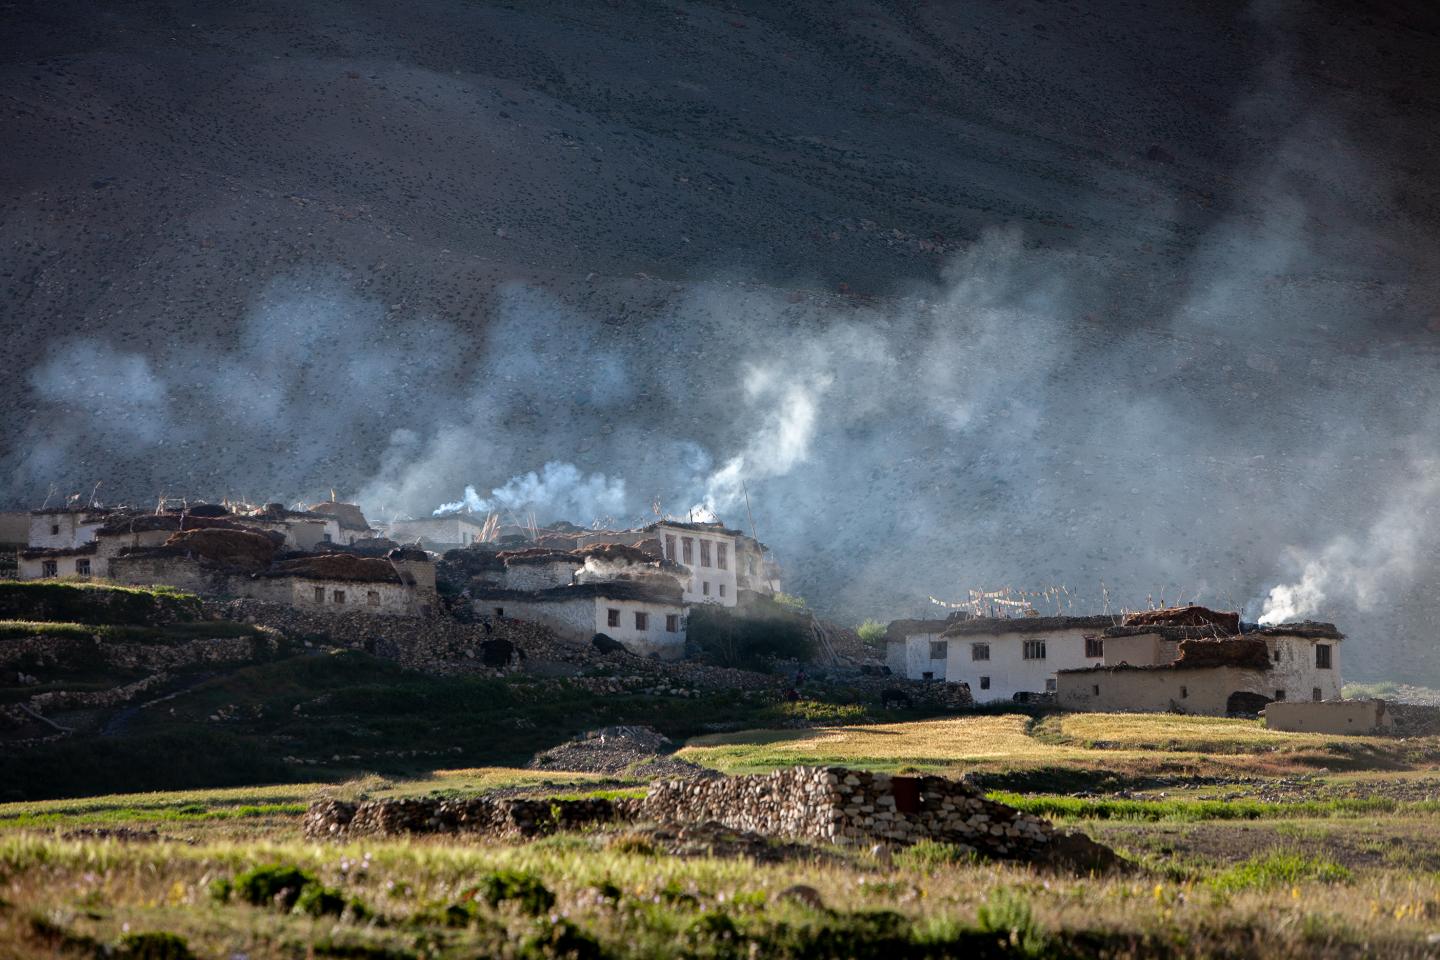 Smoke coming from village households in Ladakh, India.